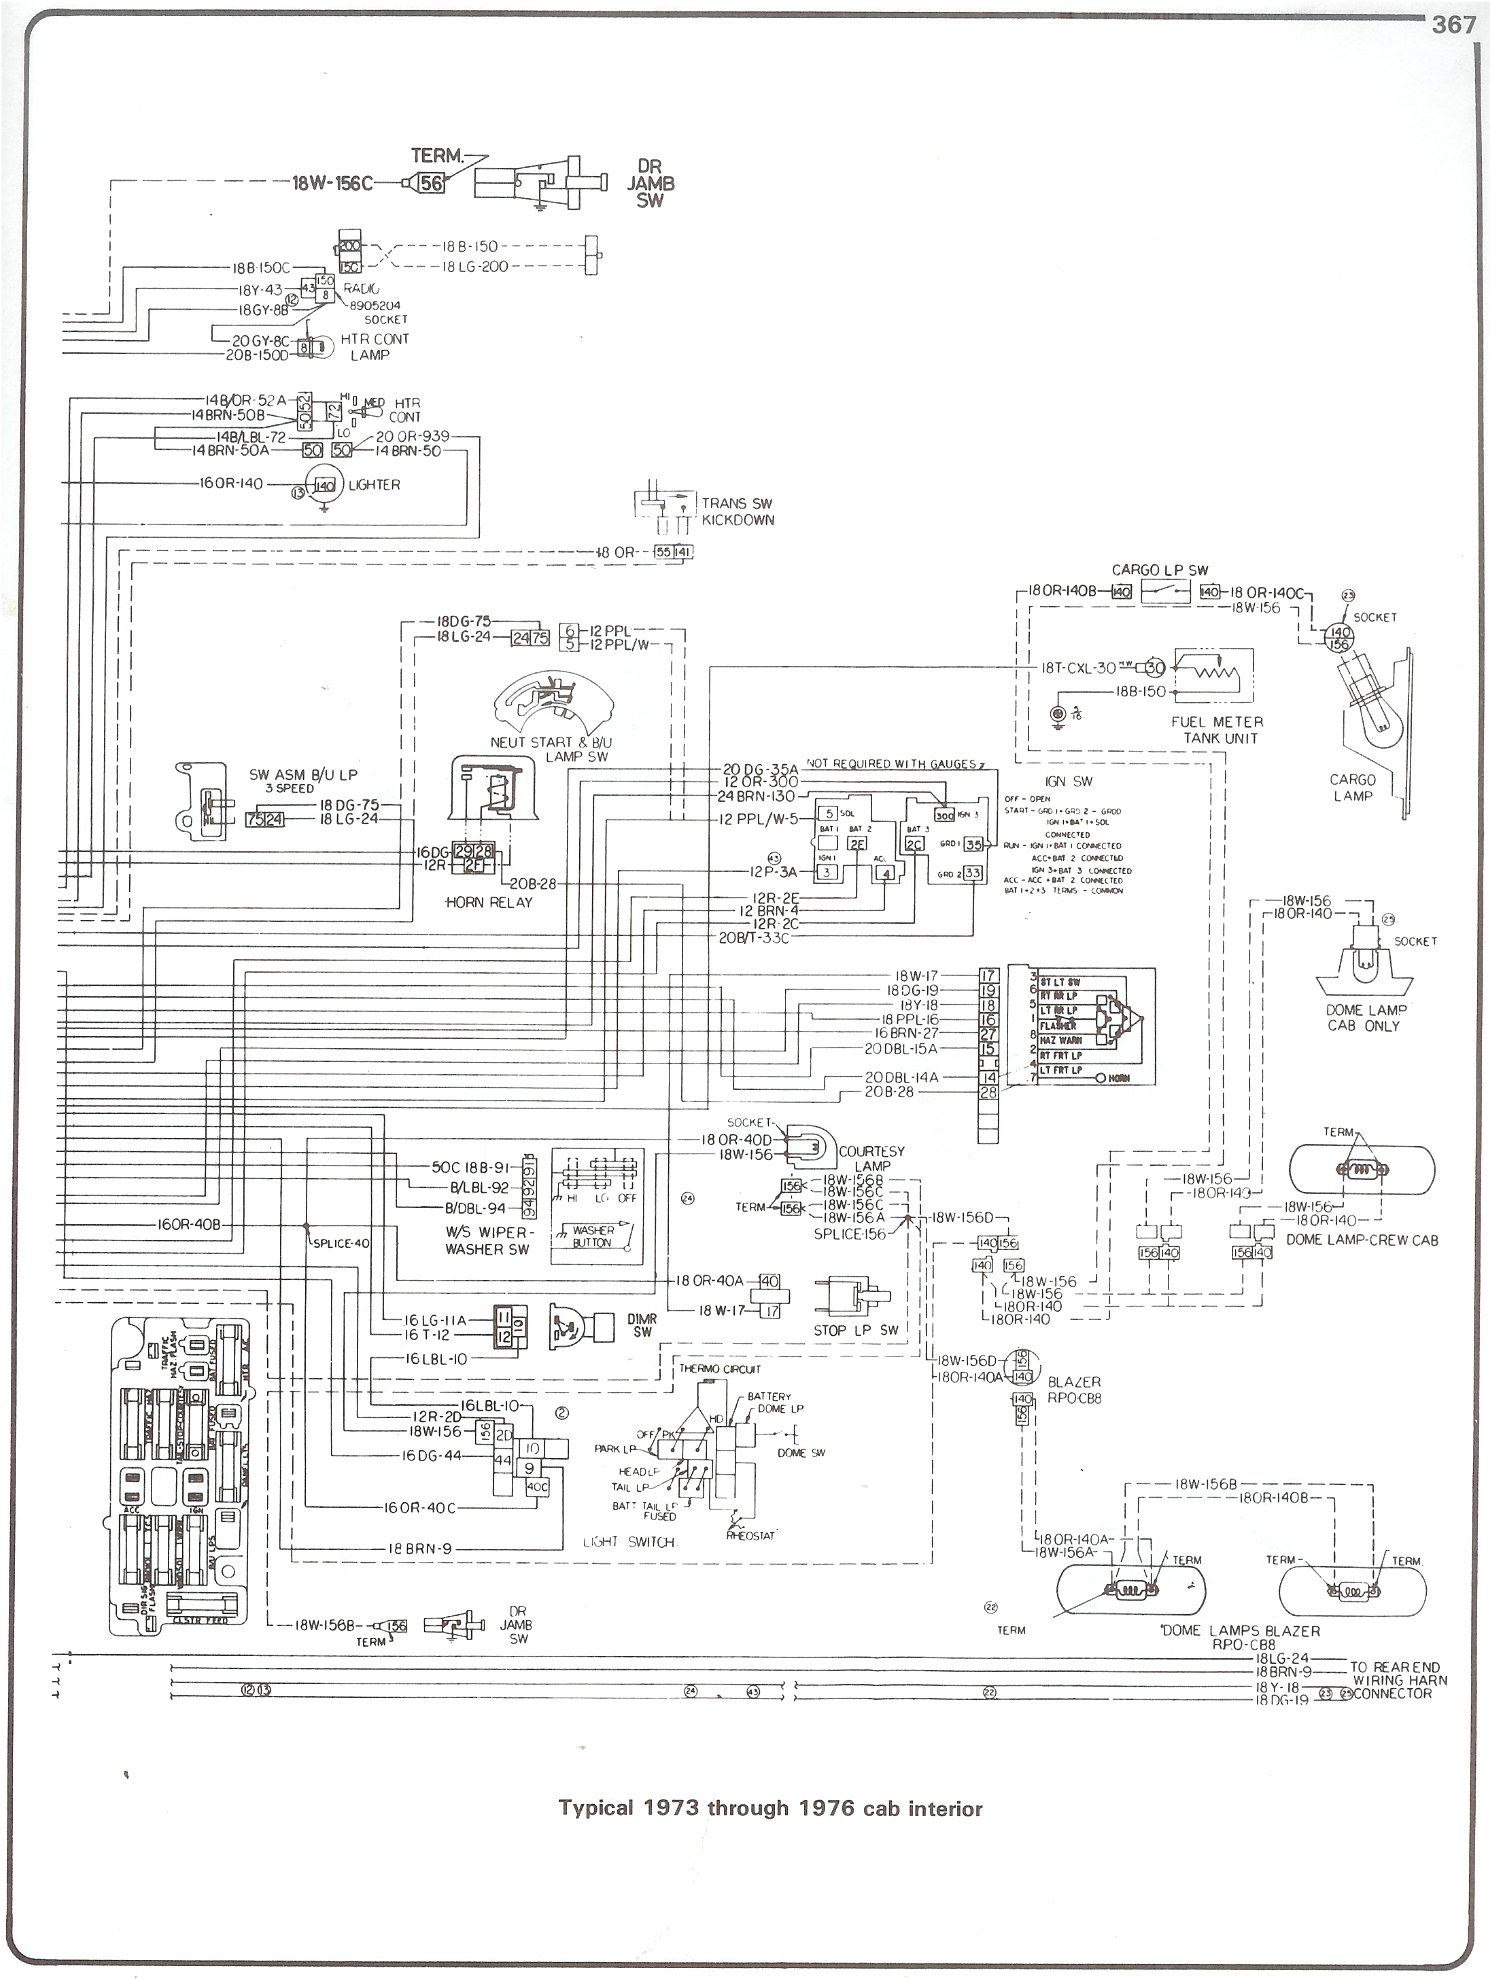 73-87 Chevy Truck Wiring Diagram Manual